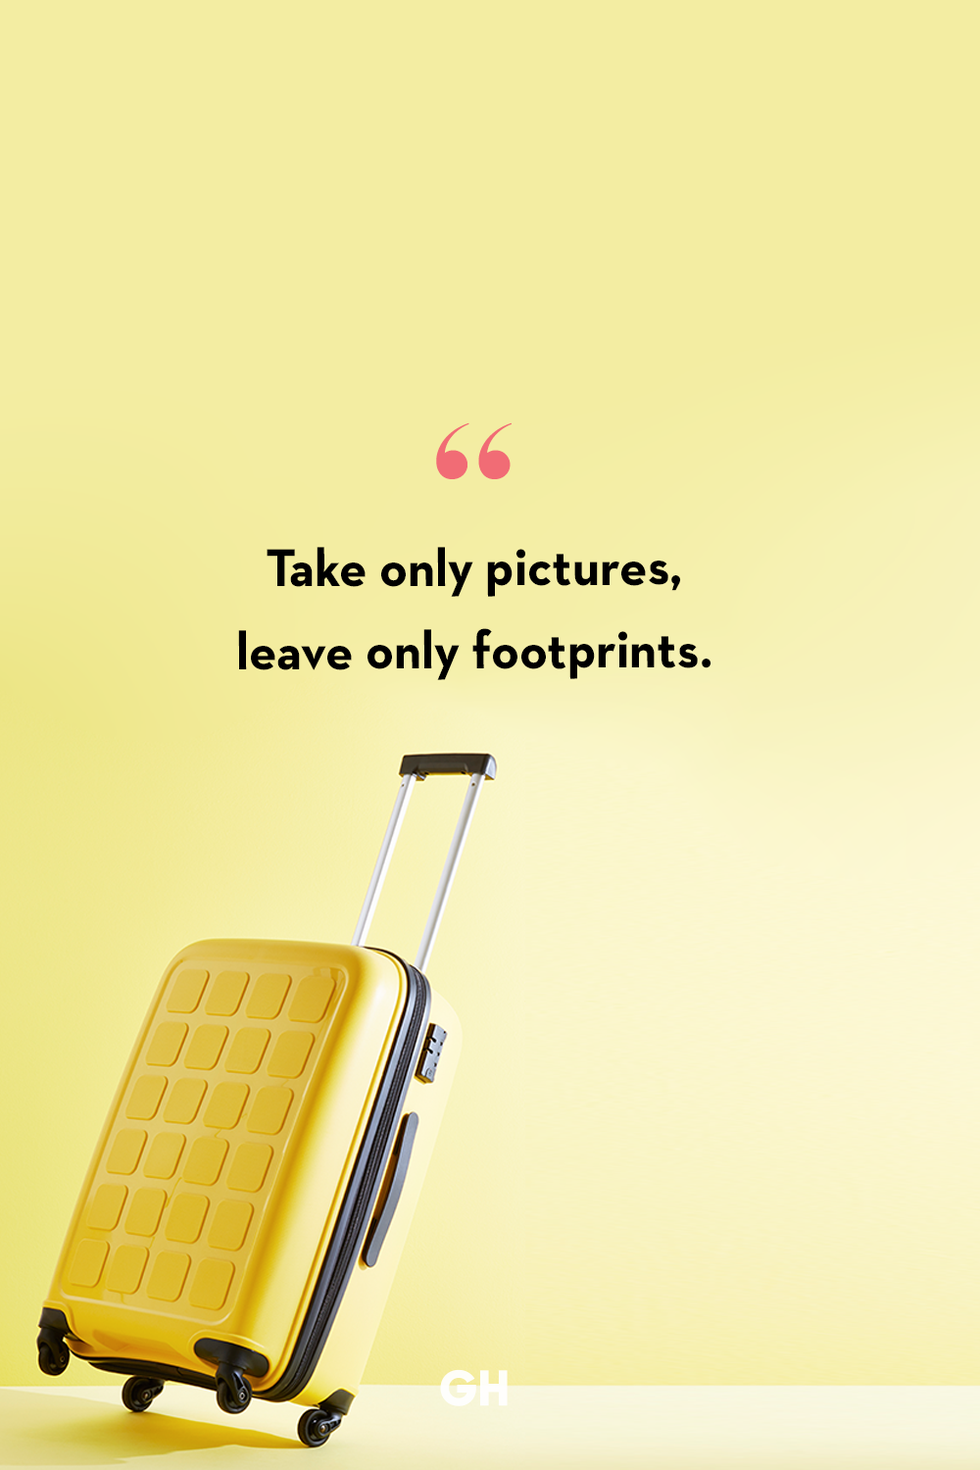 business travel captions for instagram